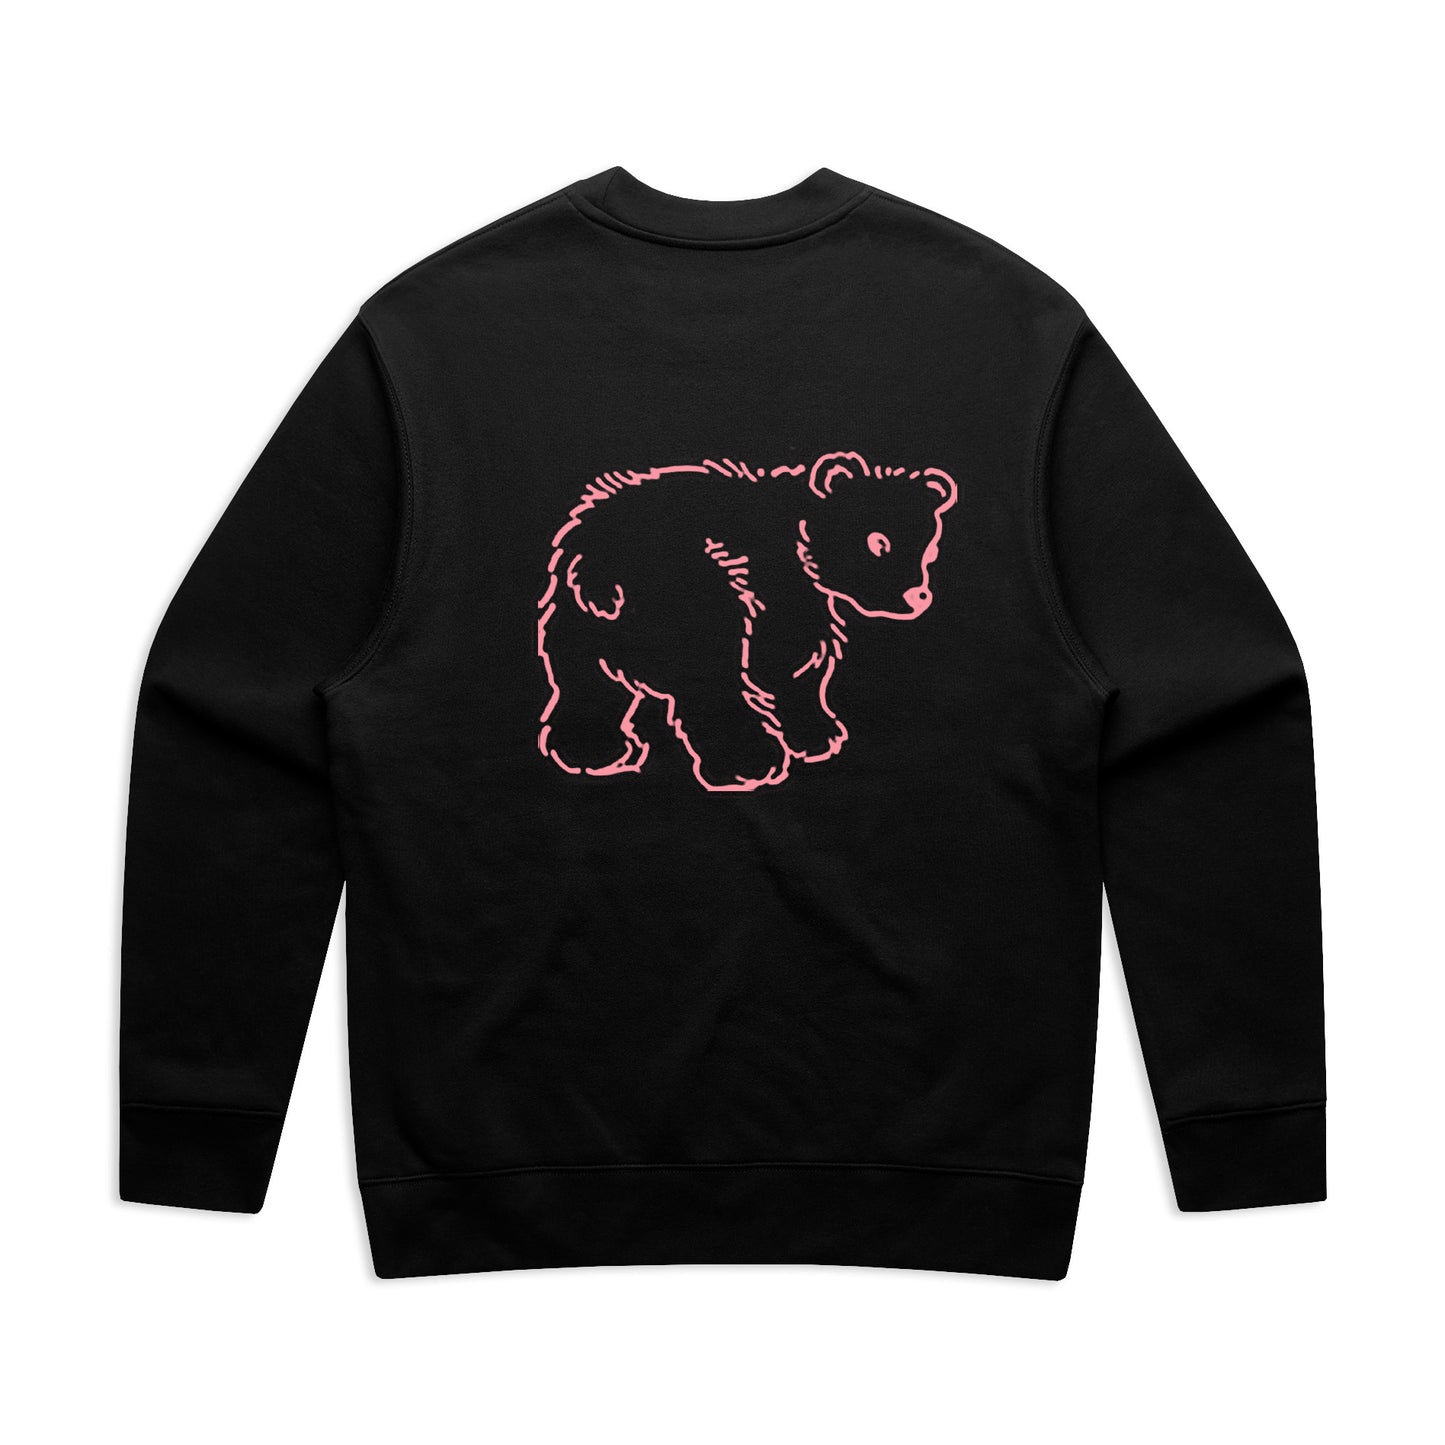 Black with Pink Print Cub Scout Sweatshirt by Sugar Plump Fairy